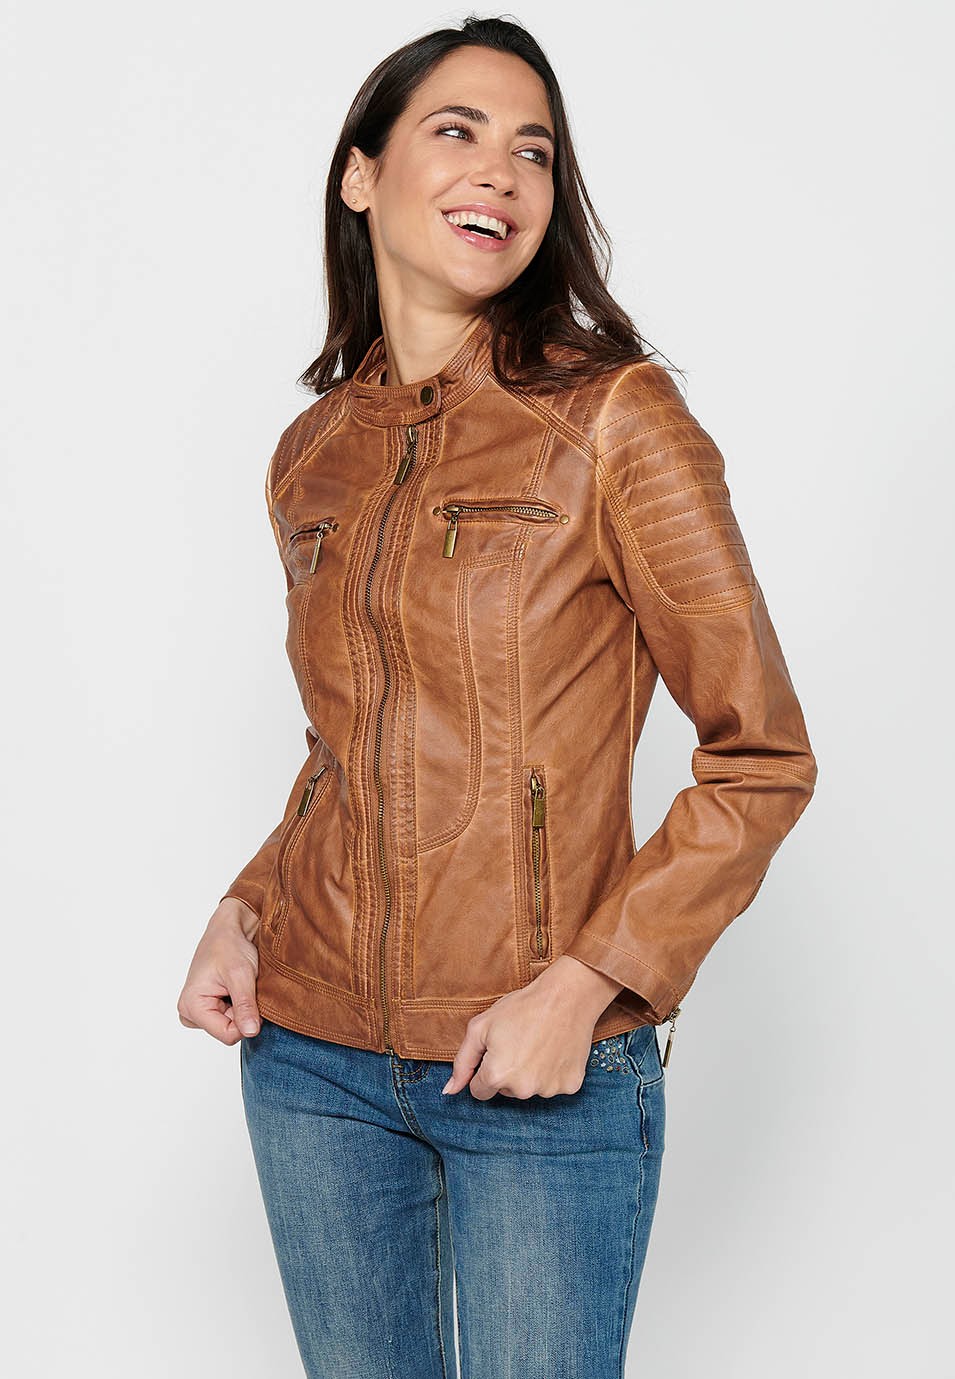 Camel Color Long Sleeve Round Neck Jacket with Front Zipper Closure for Women 2